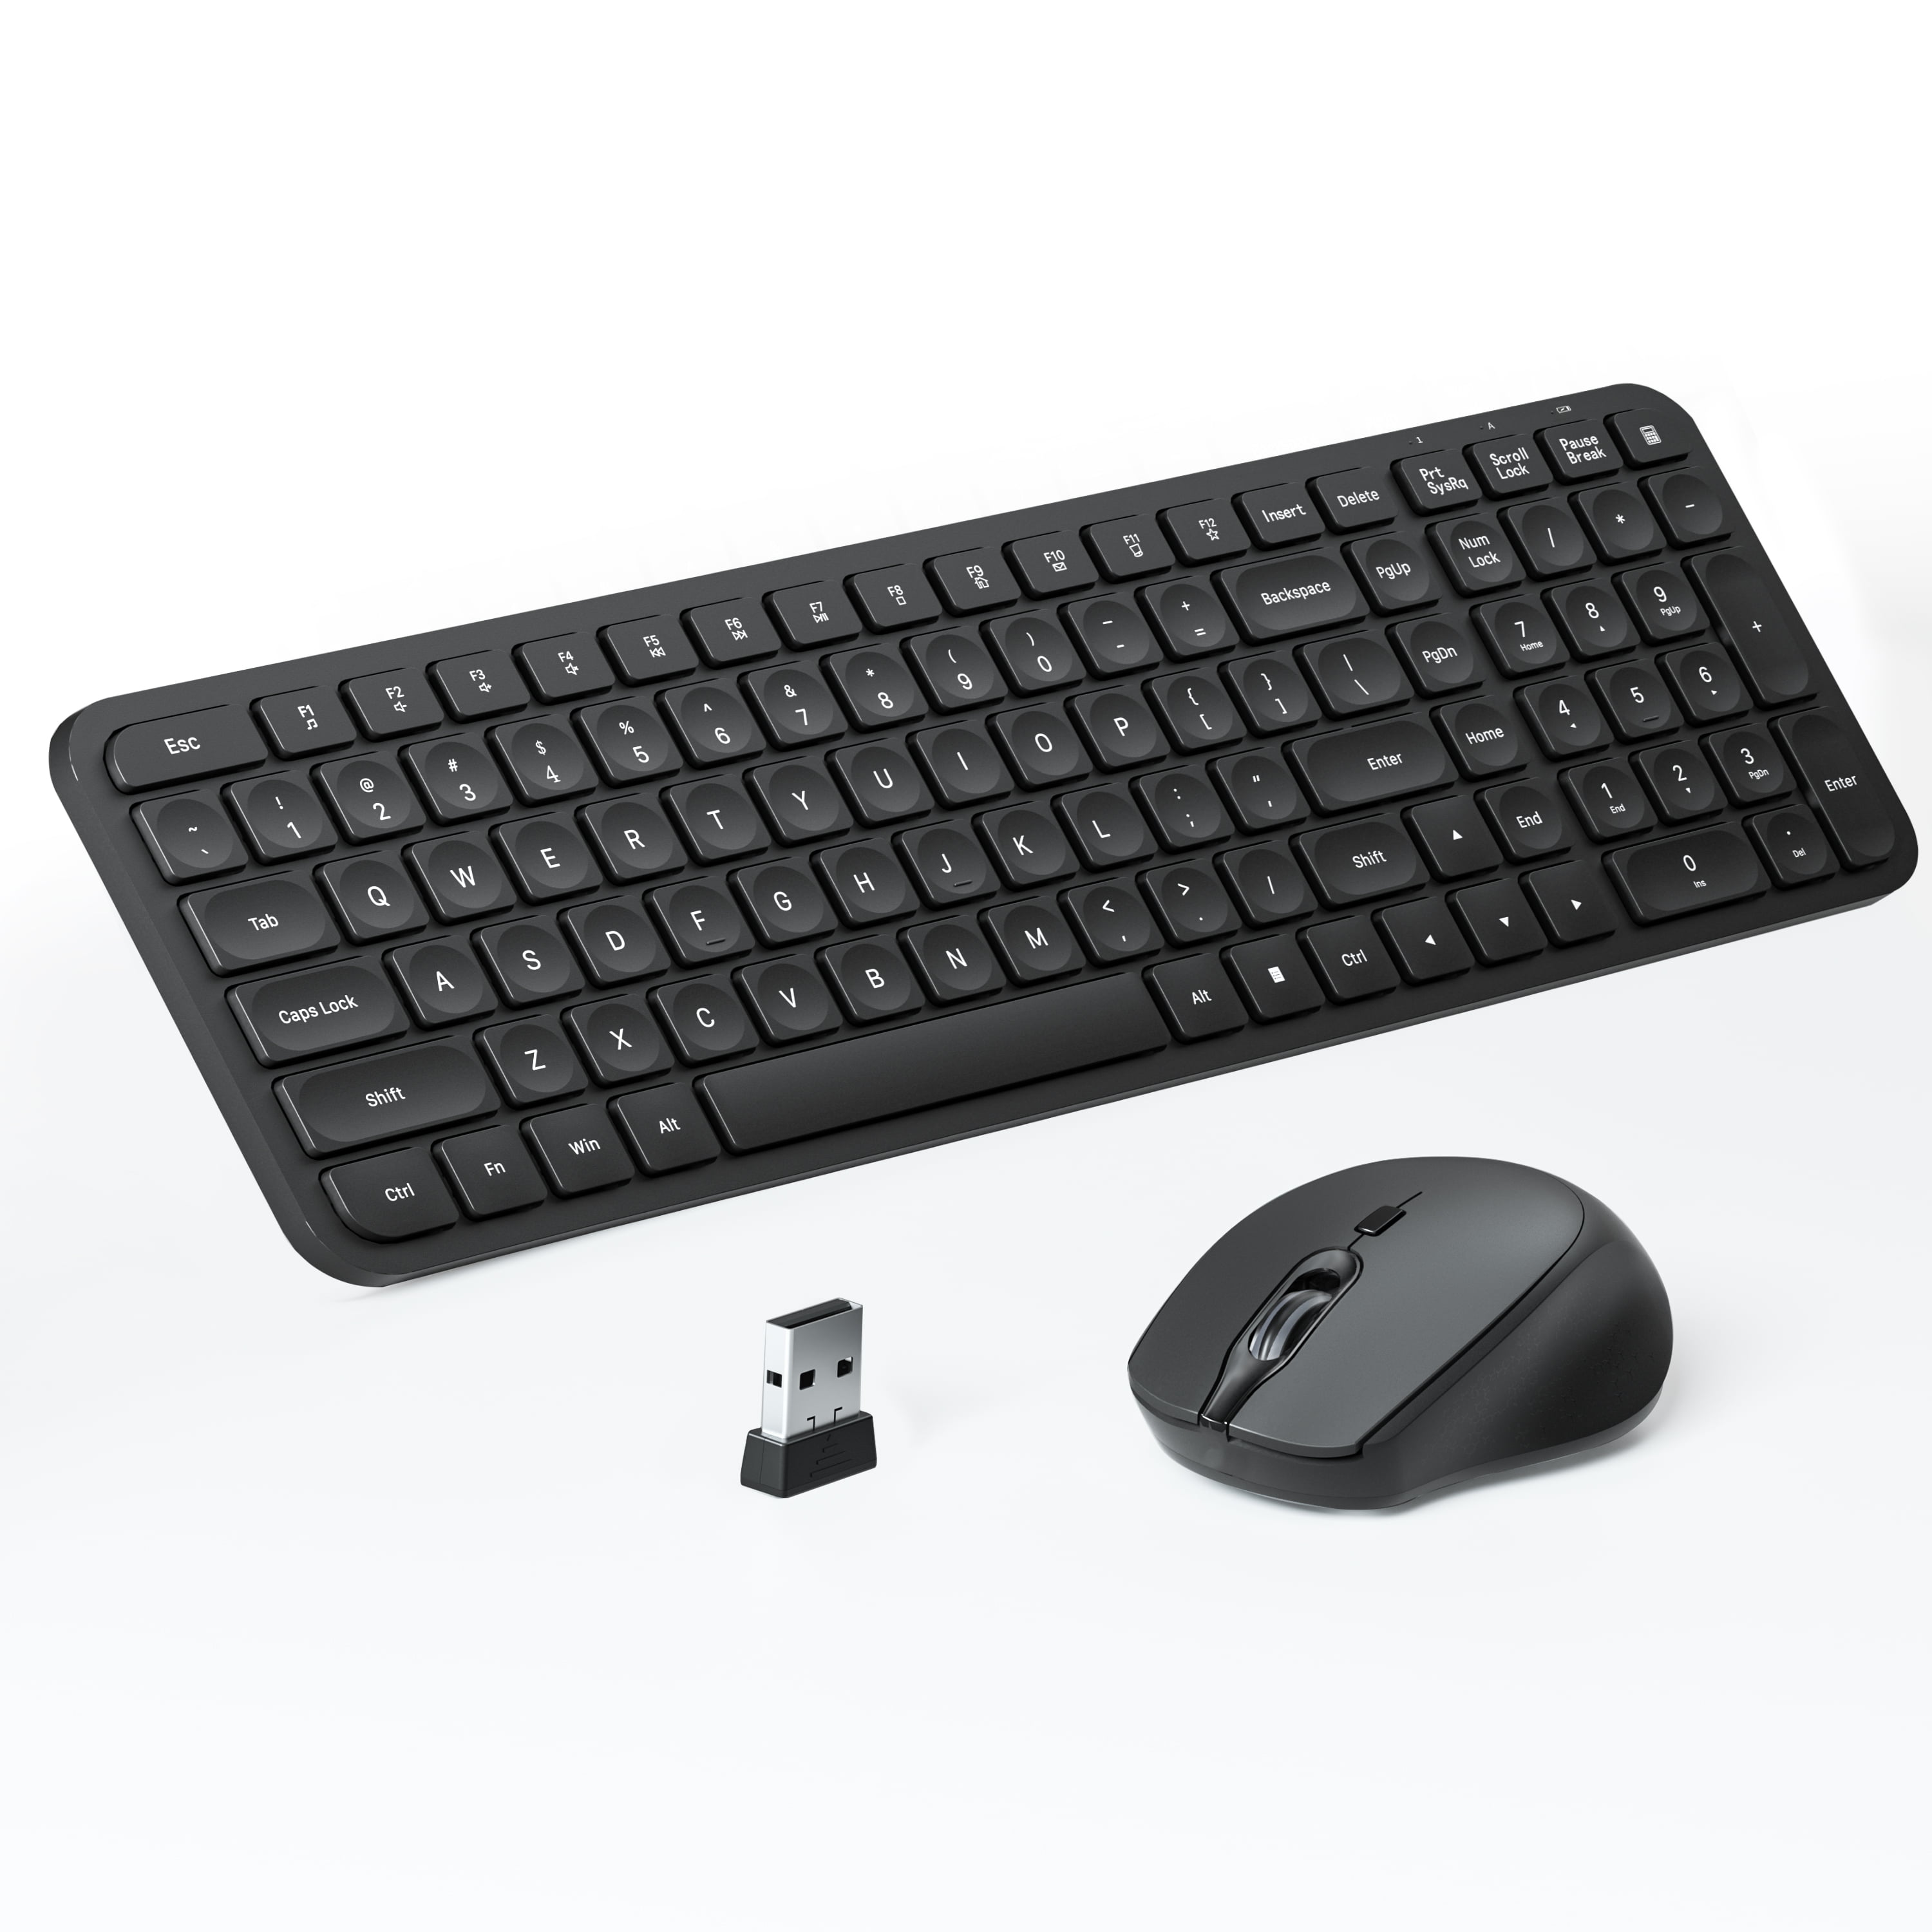 ETOSHOPY Wireless Keyboard and Mouse Combo, 2.4G Wireless Silent 